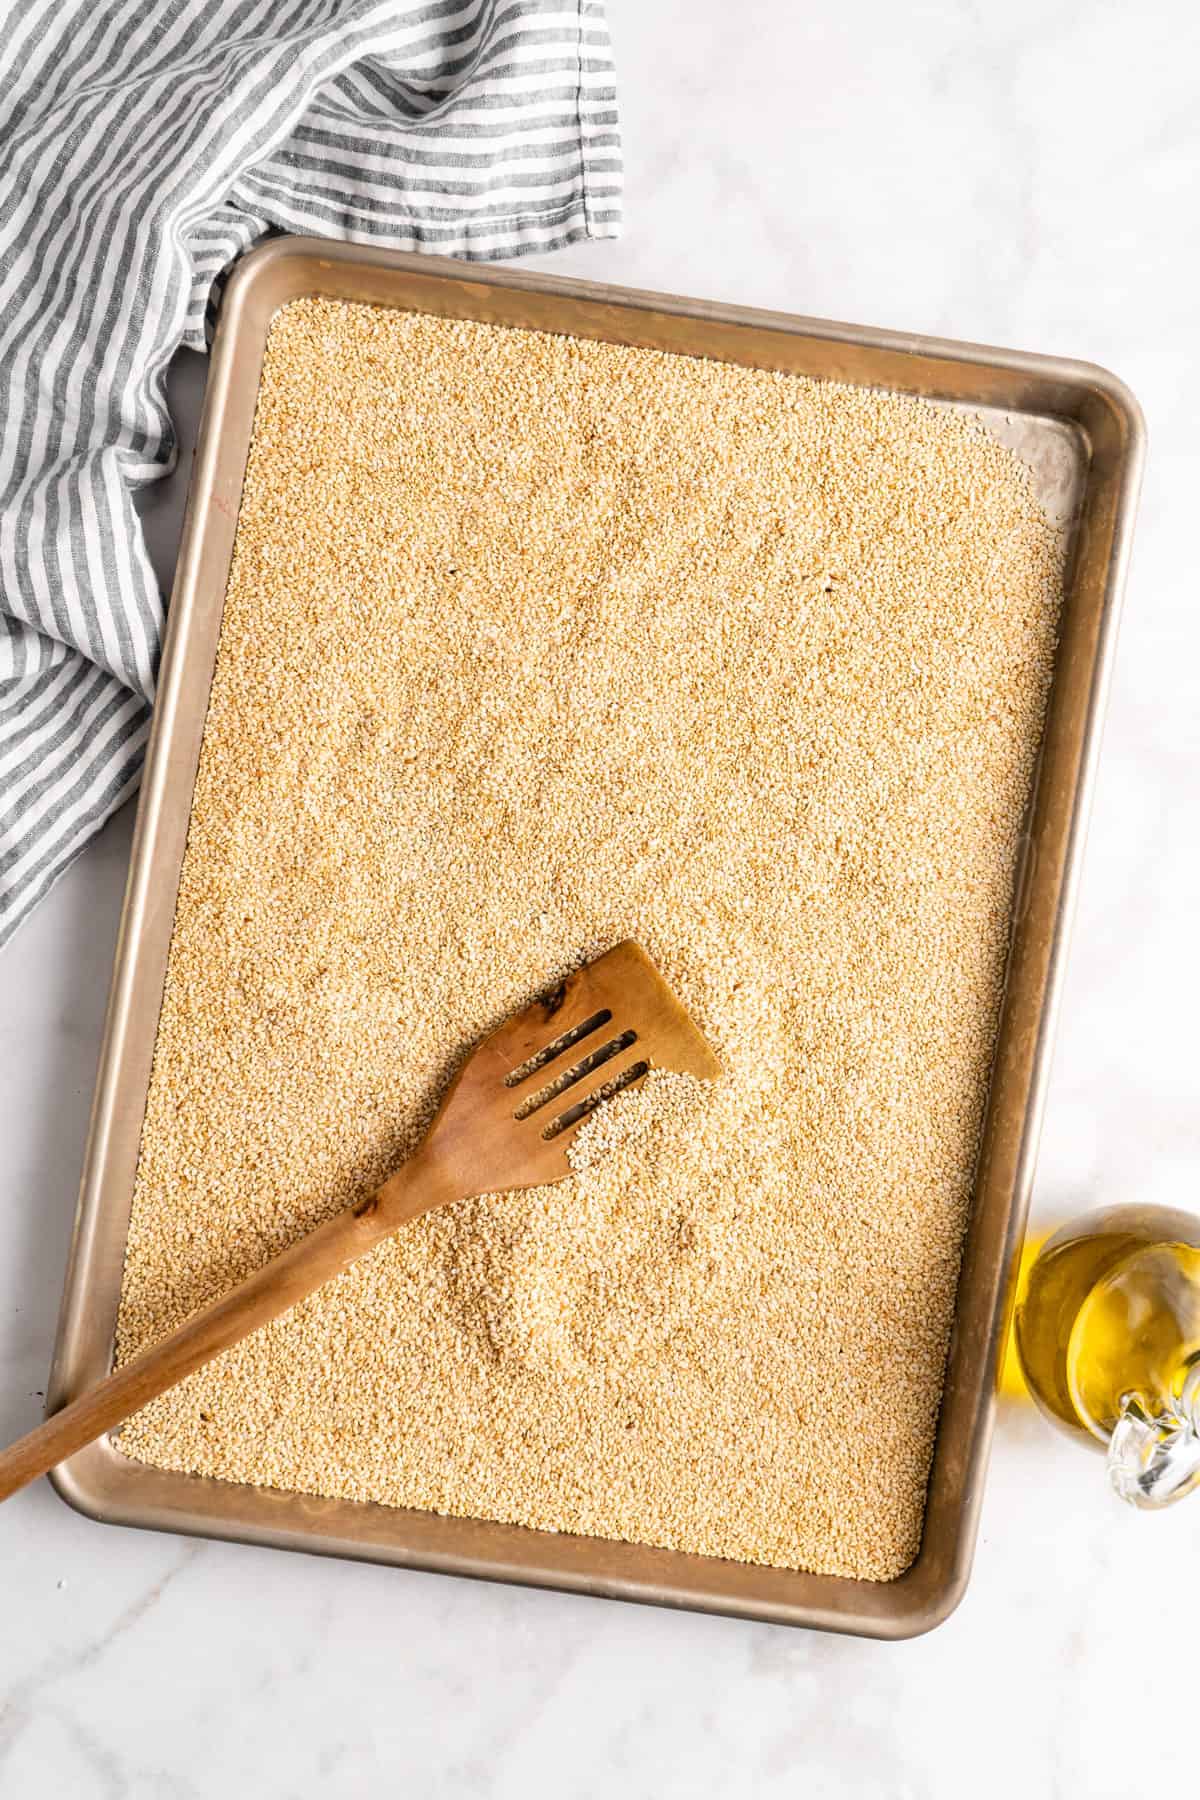 Overhead view of toasted sesame seeds on sheet pan with wooden spatula